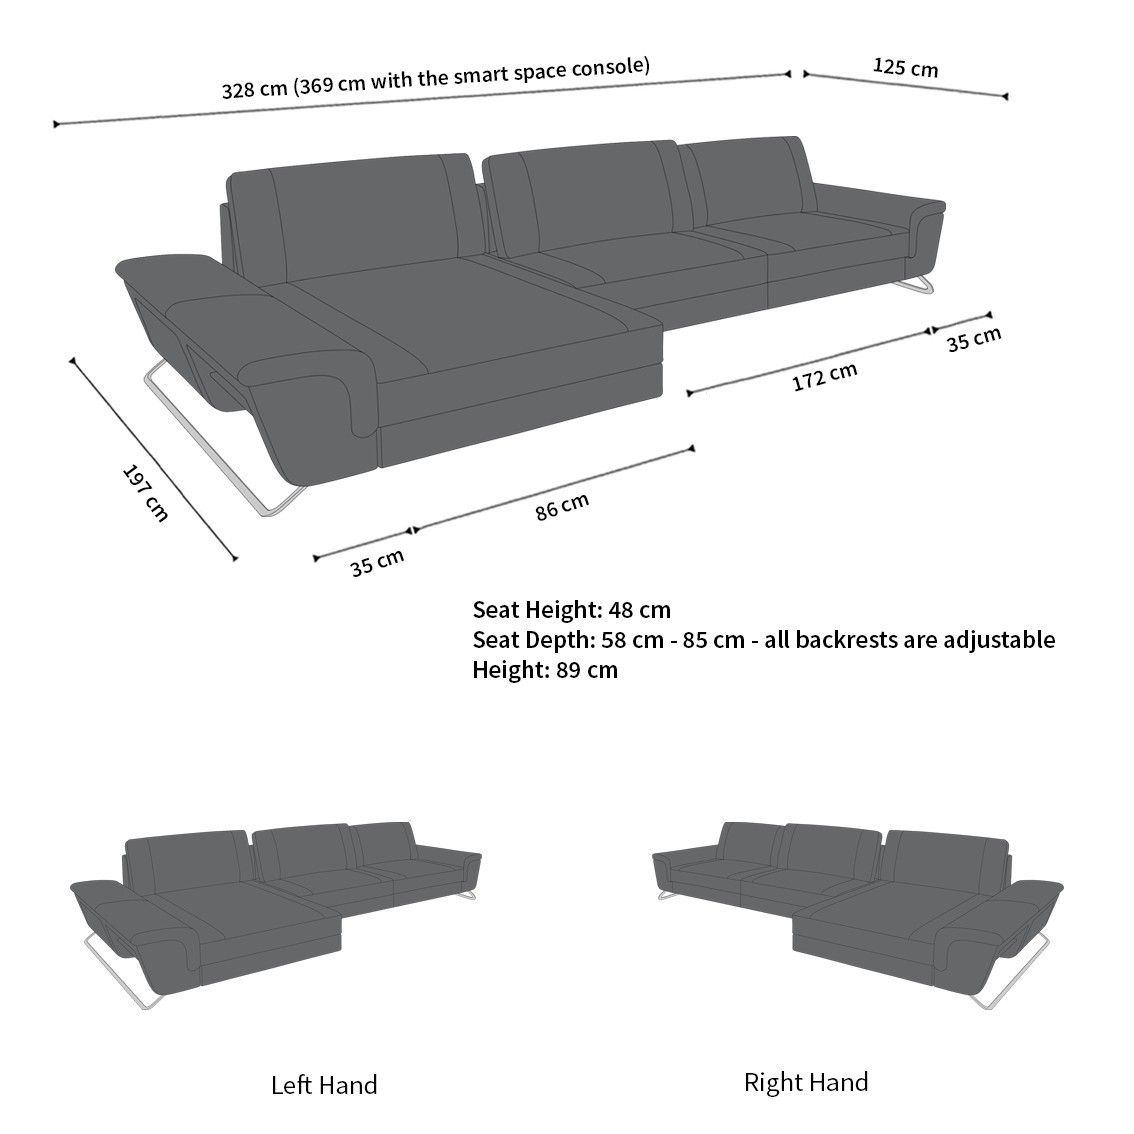 Sectional Leather Sofa Bari L Shape For L Shaped Couches With Adjustable Backrest (View 10 of 20)